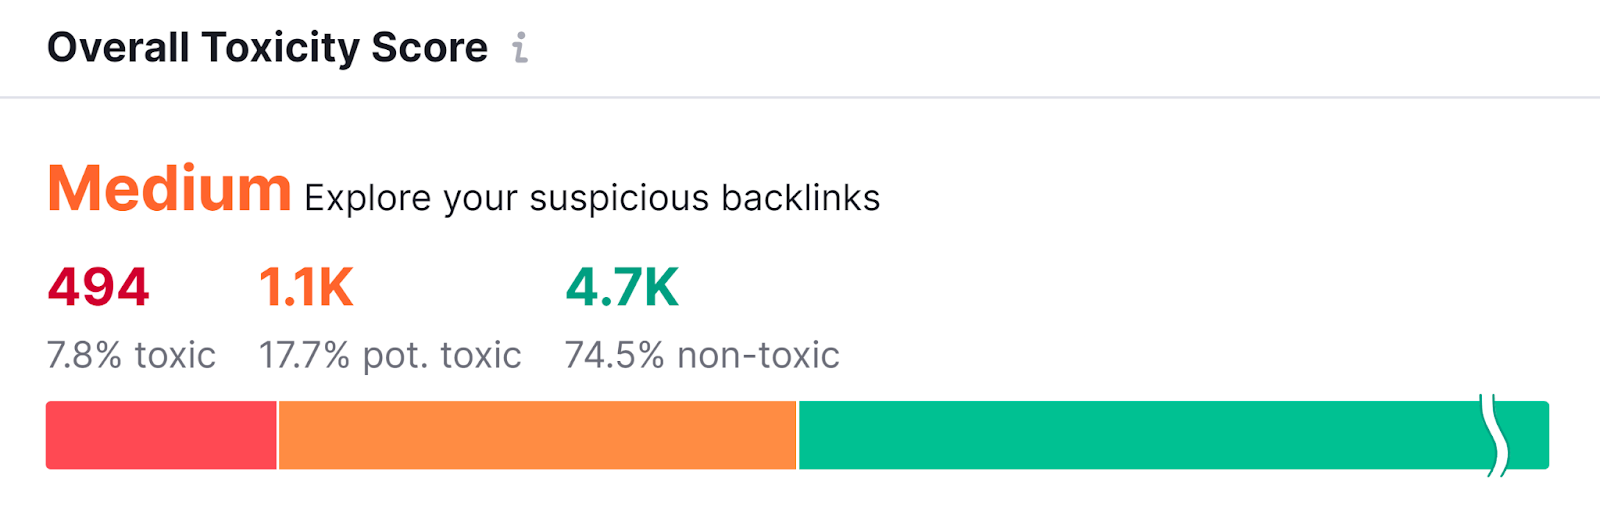 Overall Toxicity Score card showing Medium Toxicity and distribution of backlinks.